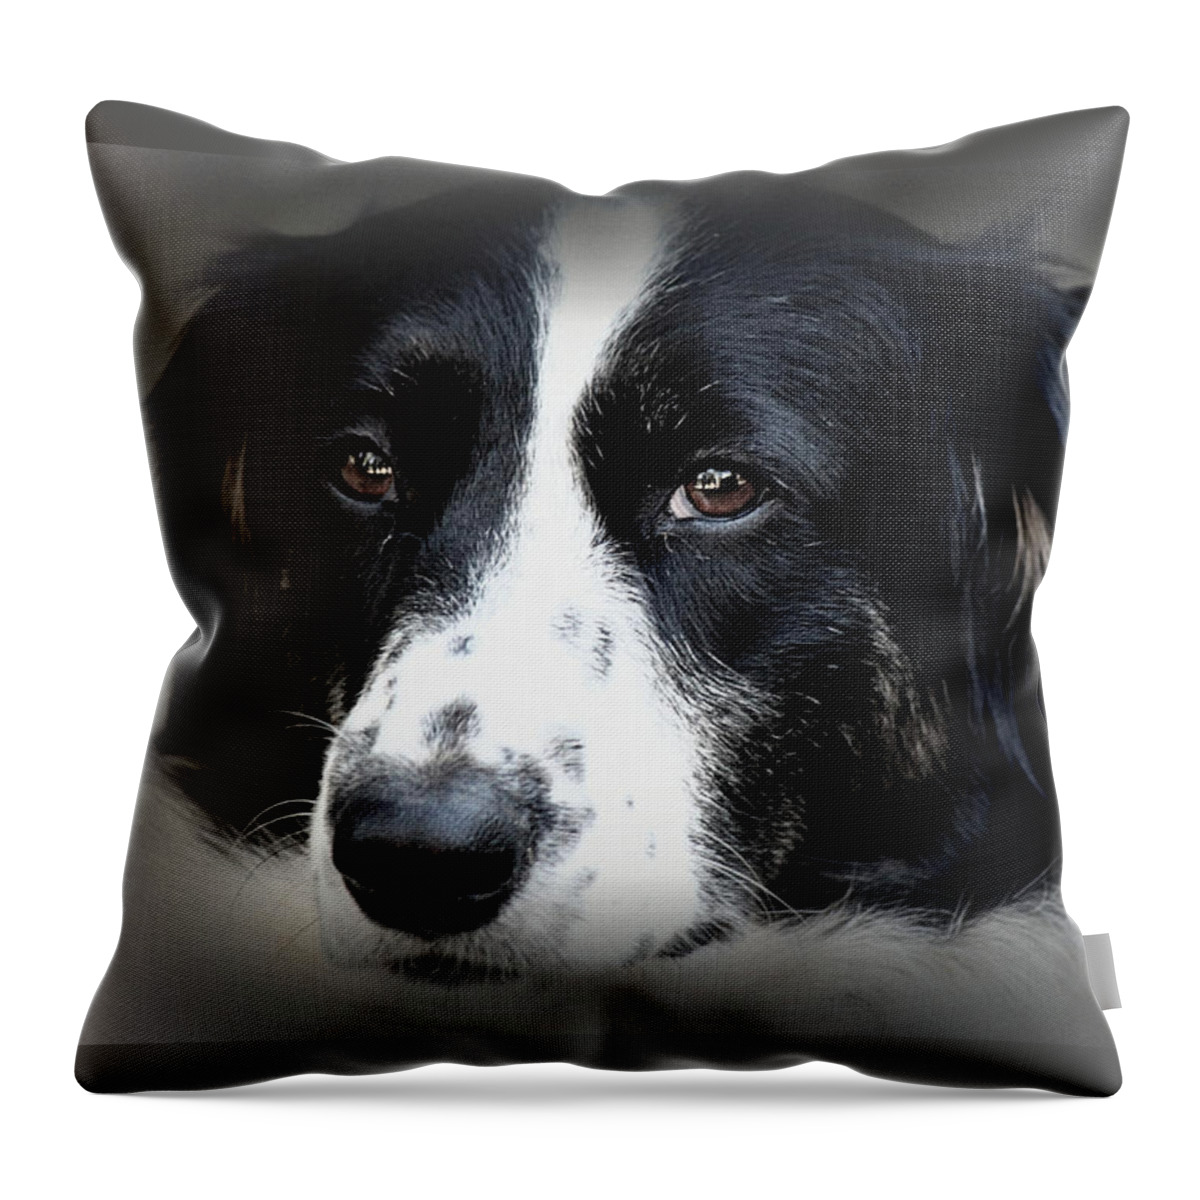 Dog Throw Pillow featuring the photograph True Companion by Melanie Lankford Photography